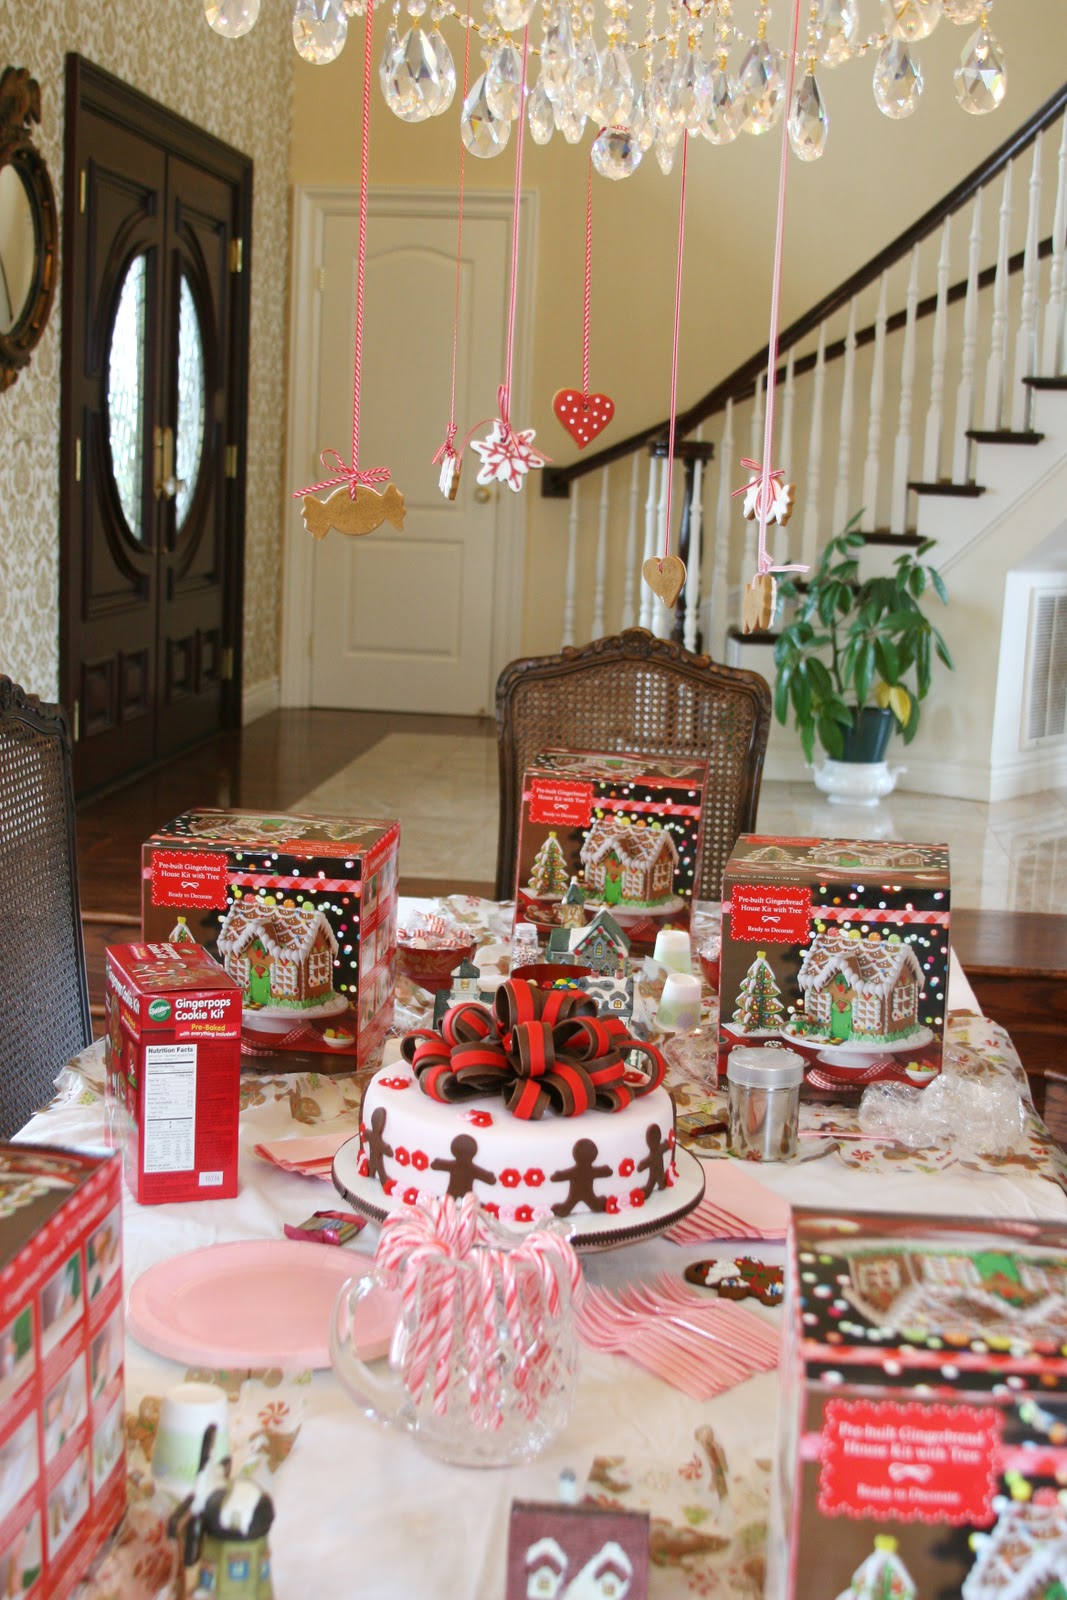  Sweet Parties  A Gingerbread Party  Glorious Treats